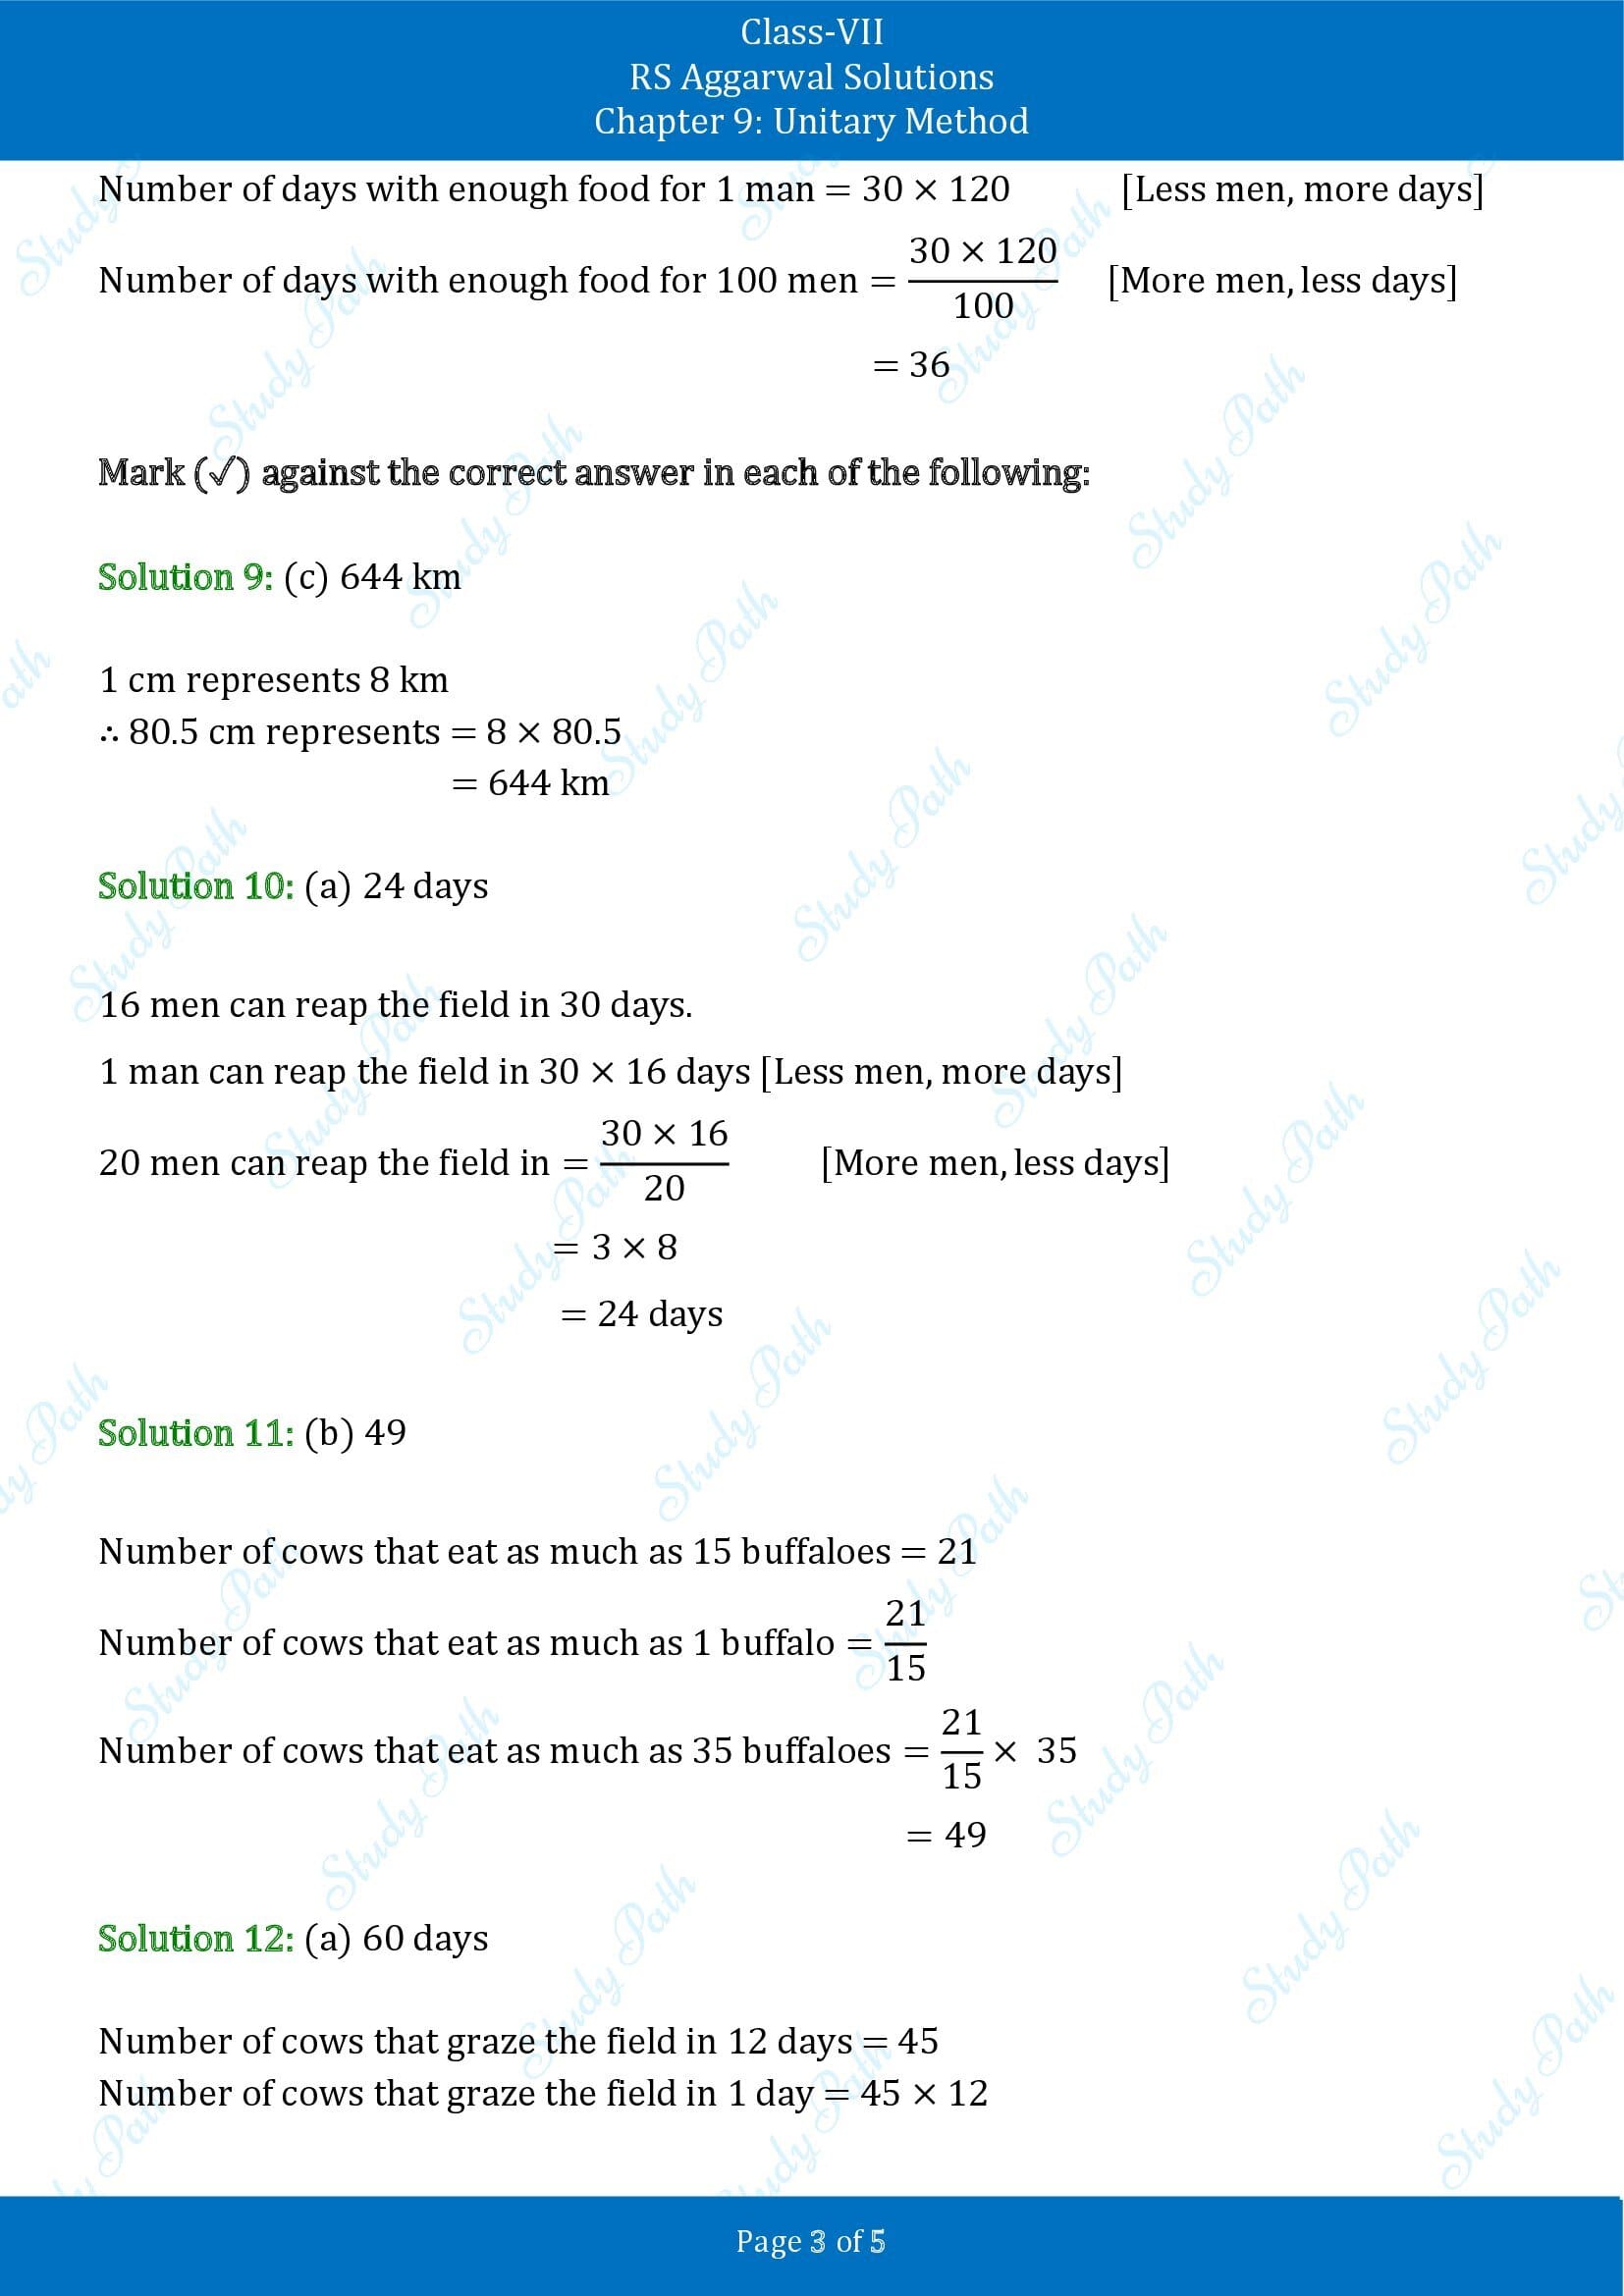 RS Aggarwal Solutions Class 7 Chapter 9 Unitary Method Test Paper 00003